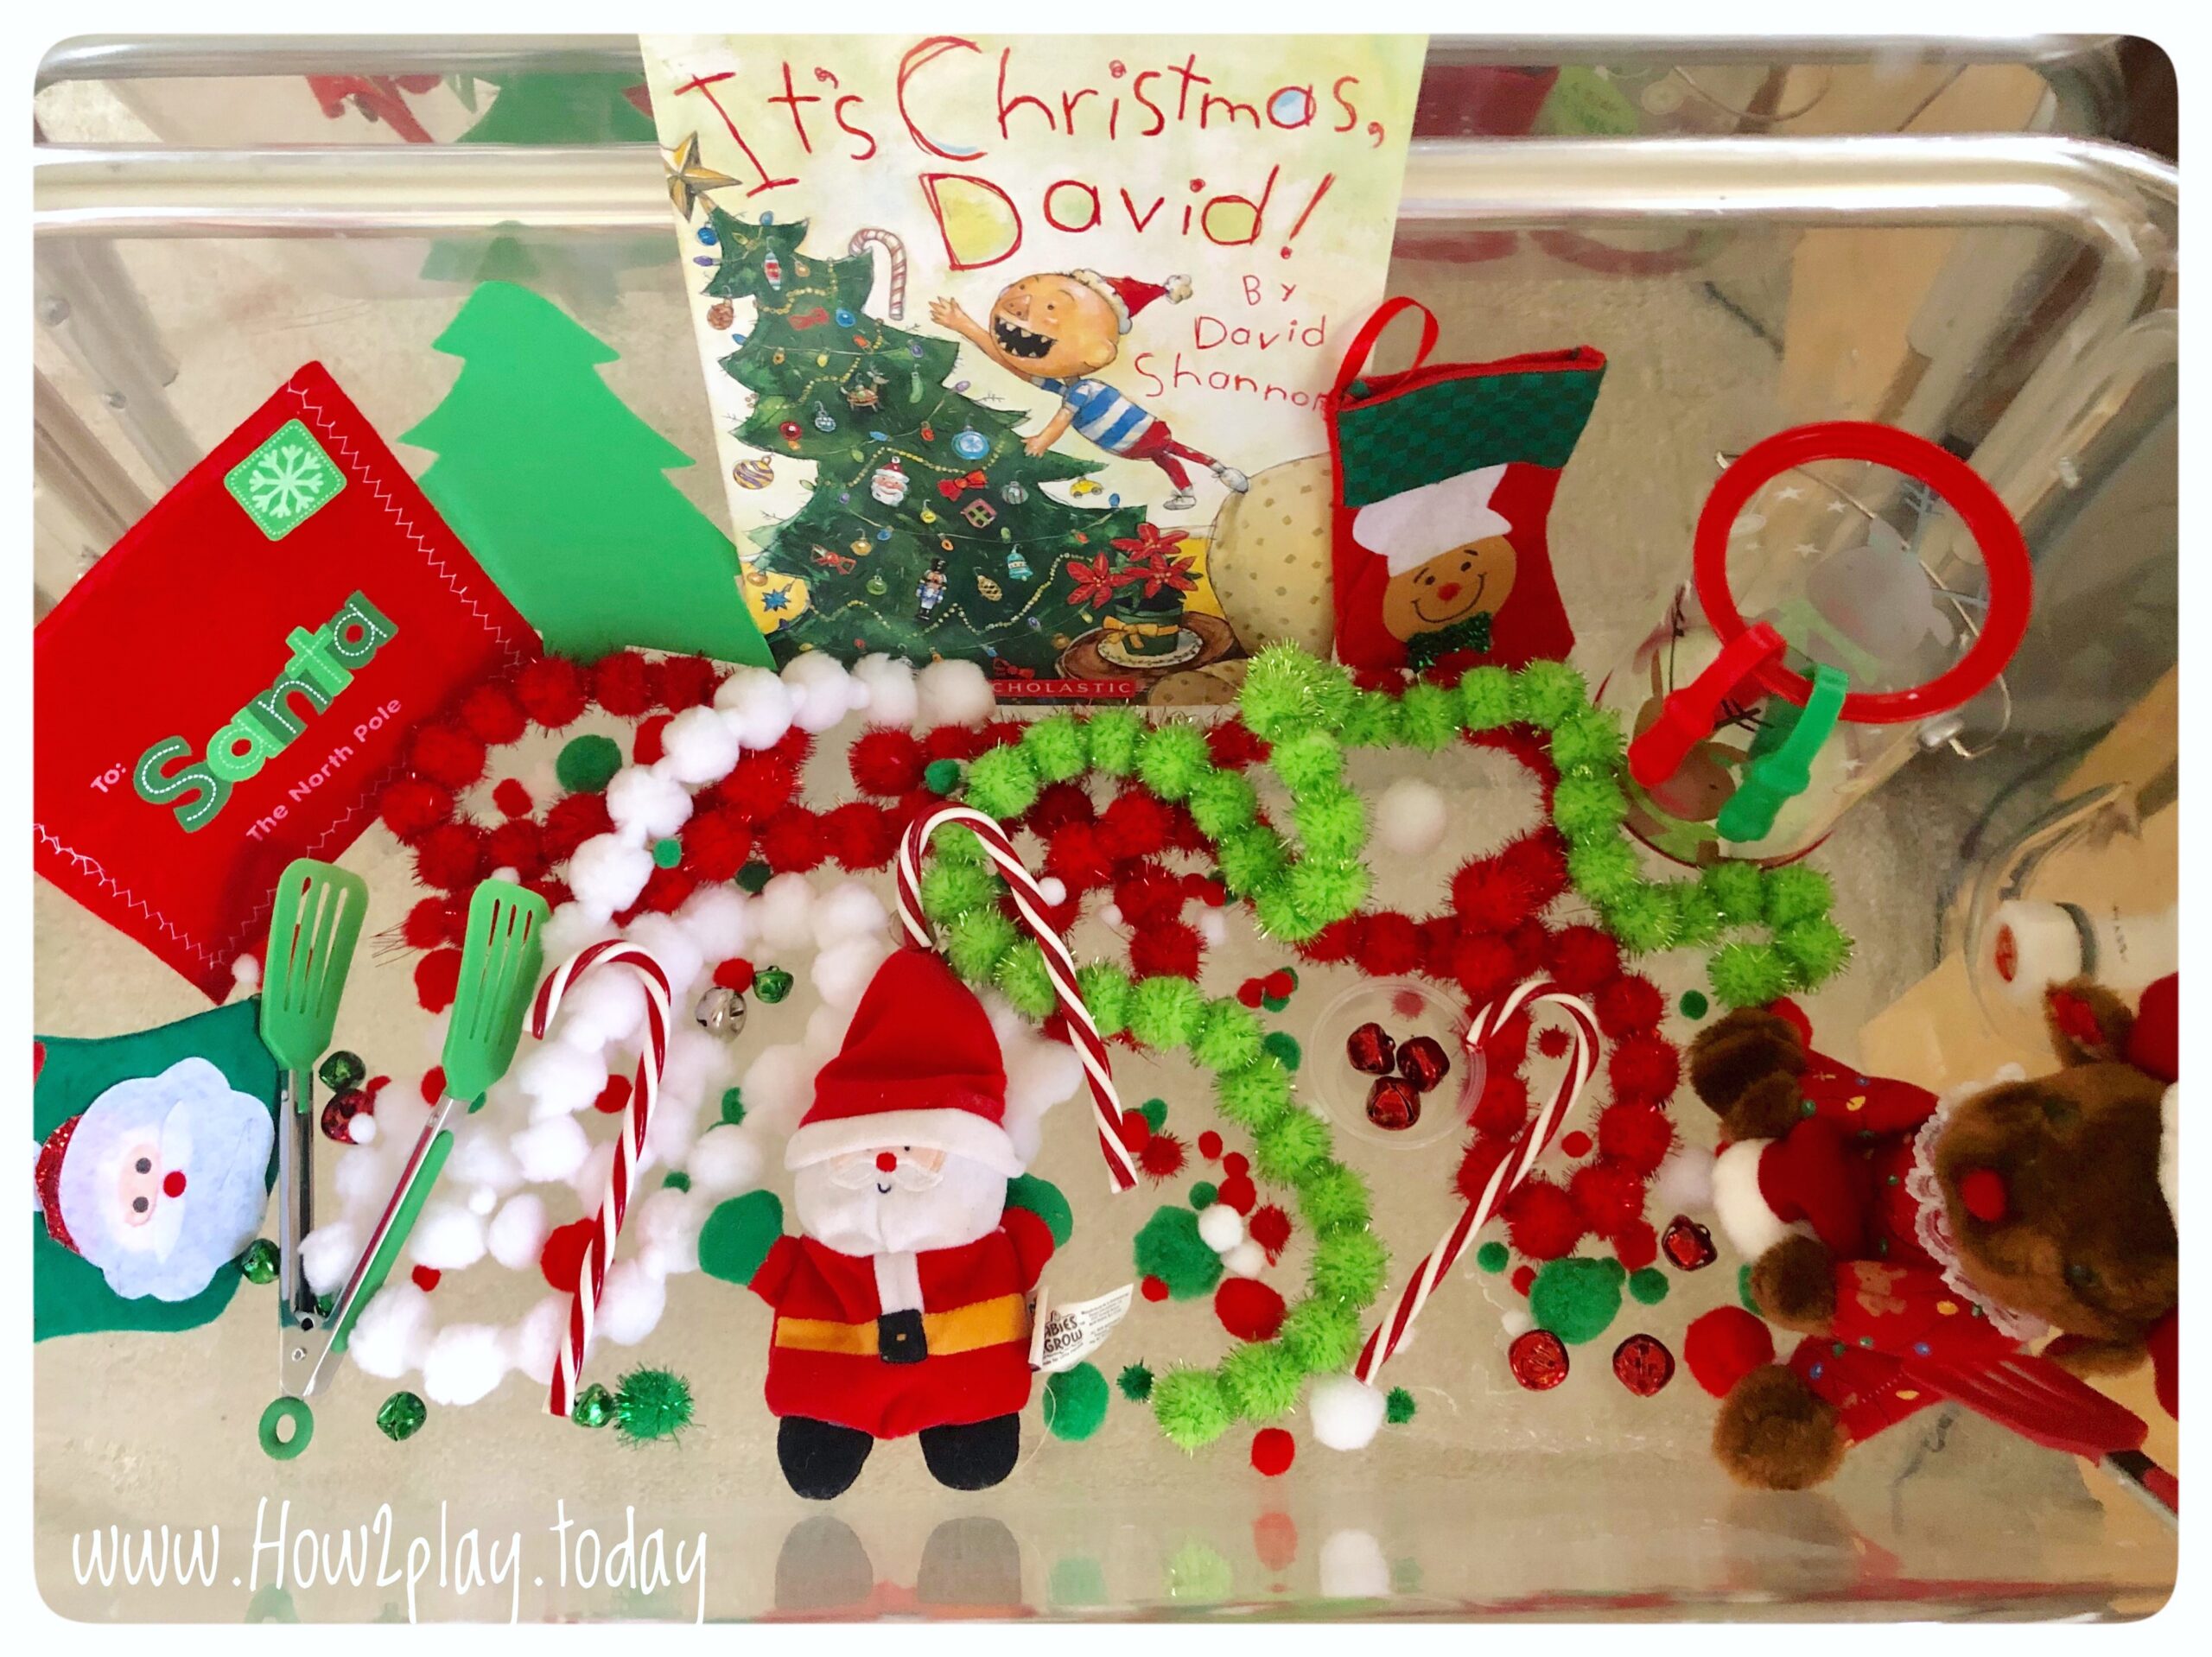 It's Christmas, David Sensory Bin: creating a sensory bin focused around a child's favorite book encourages continued play and love of reading